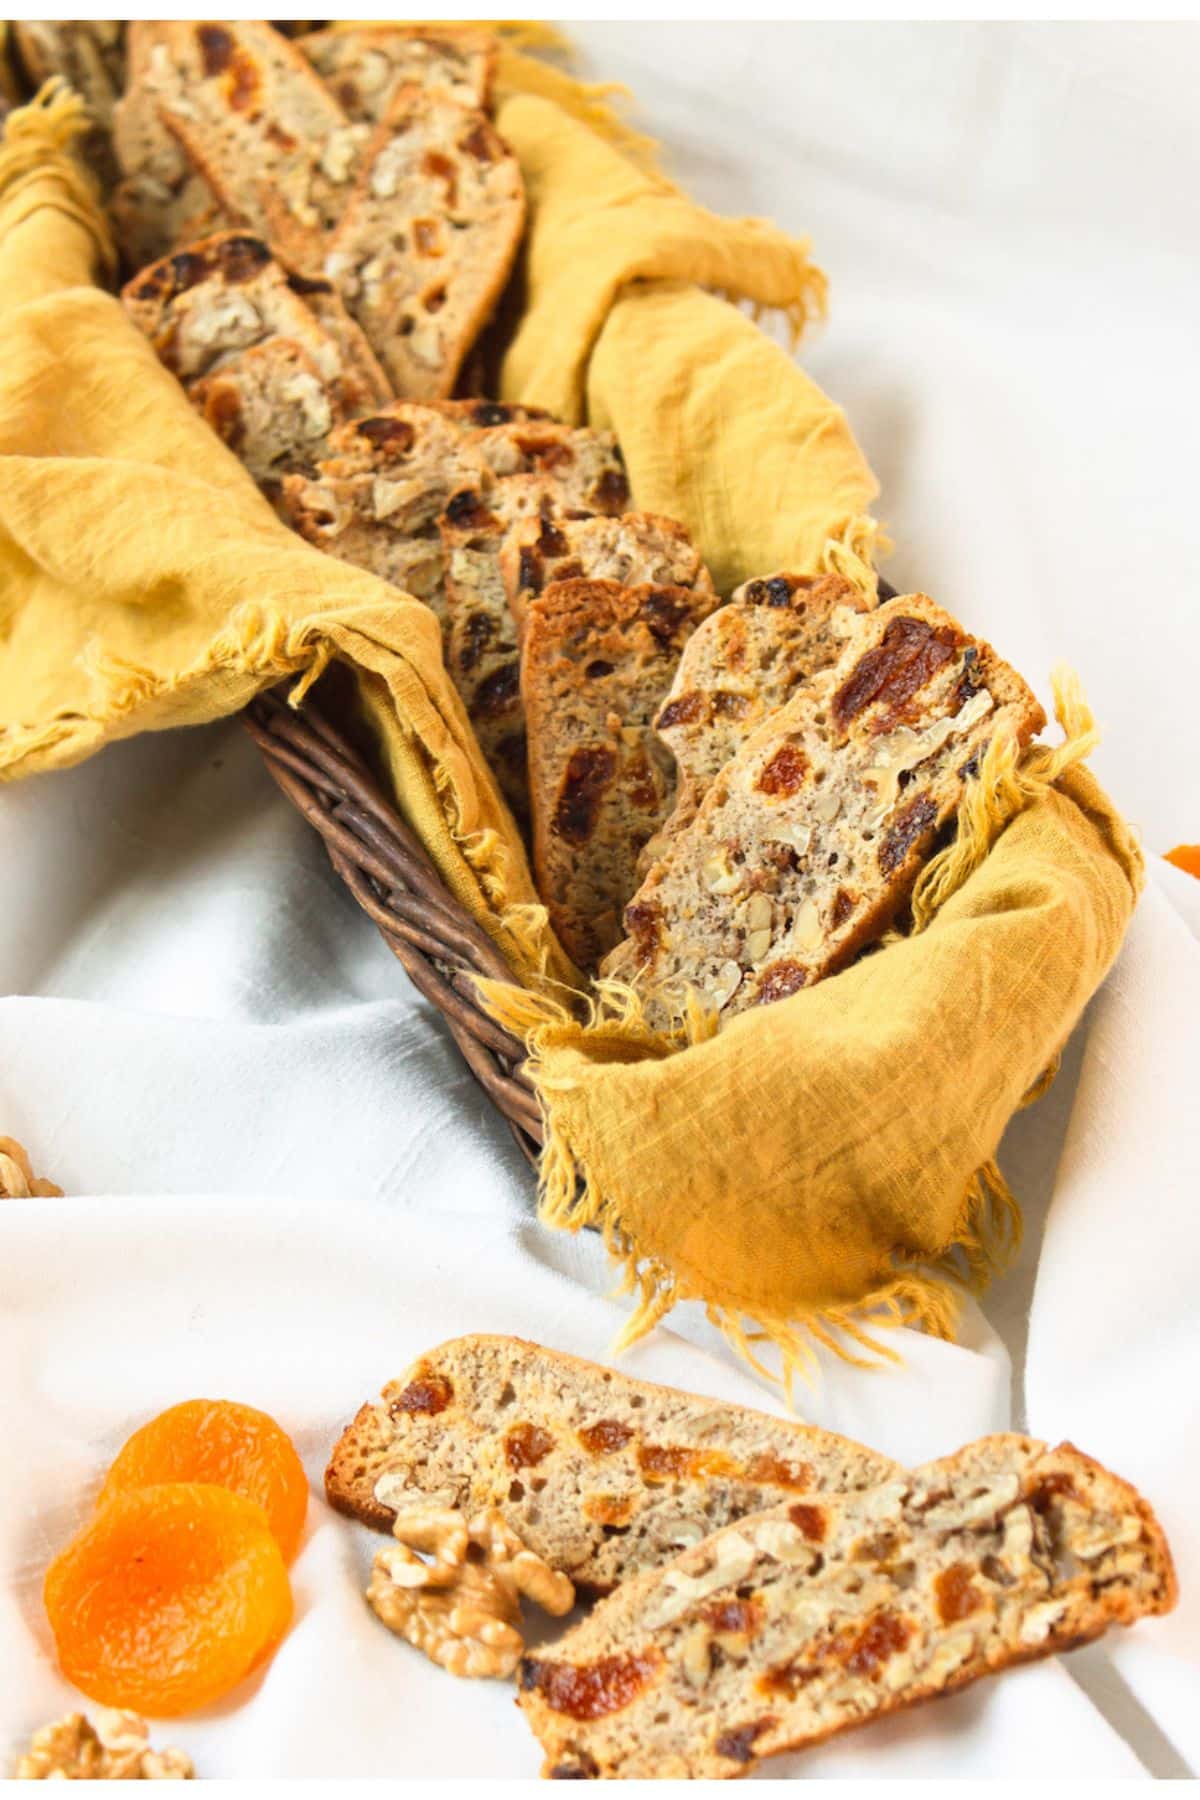 Biscotti cookies in a basket with a yellow napkin.